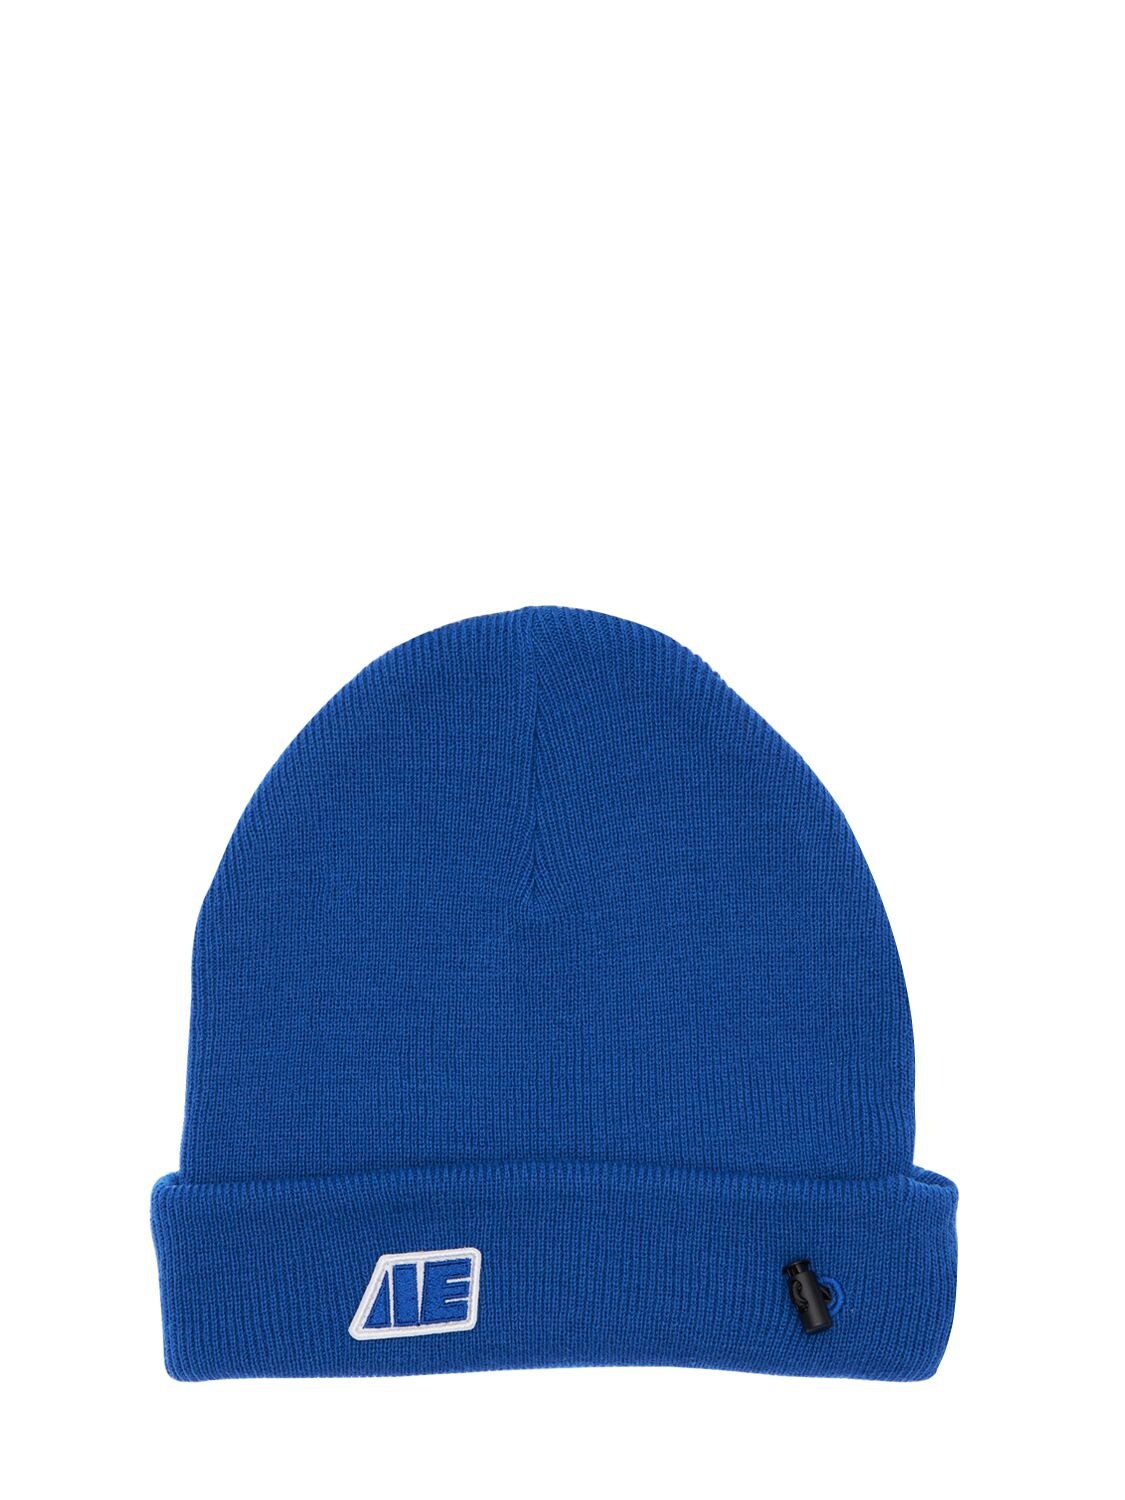 Ader Error Embroidered Wool & Acrylic Beanie Hat In Blue